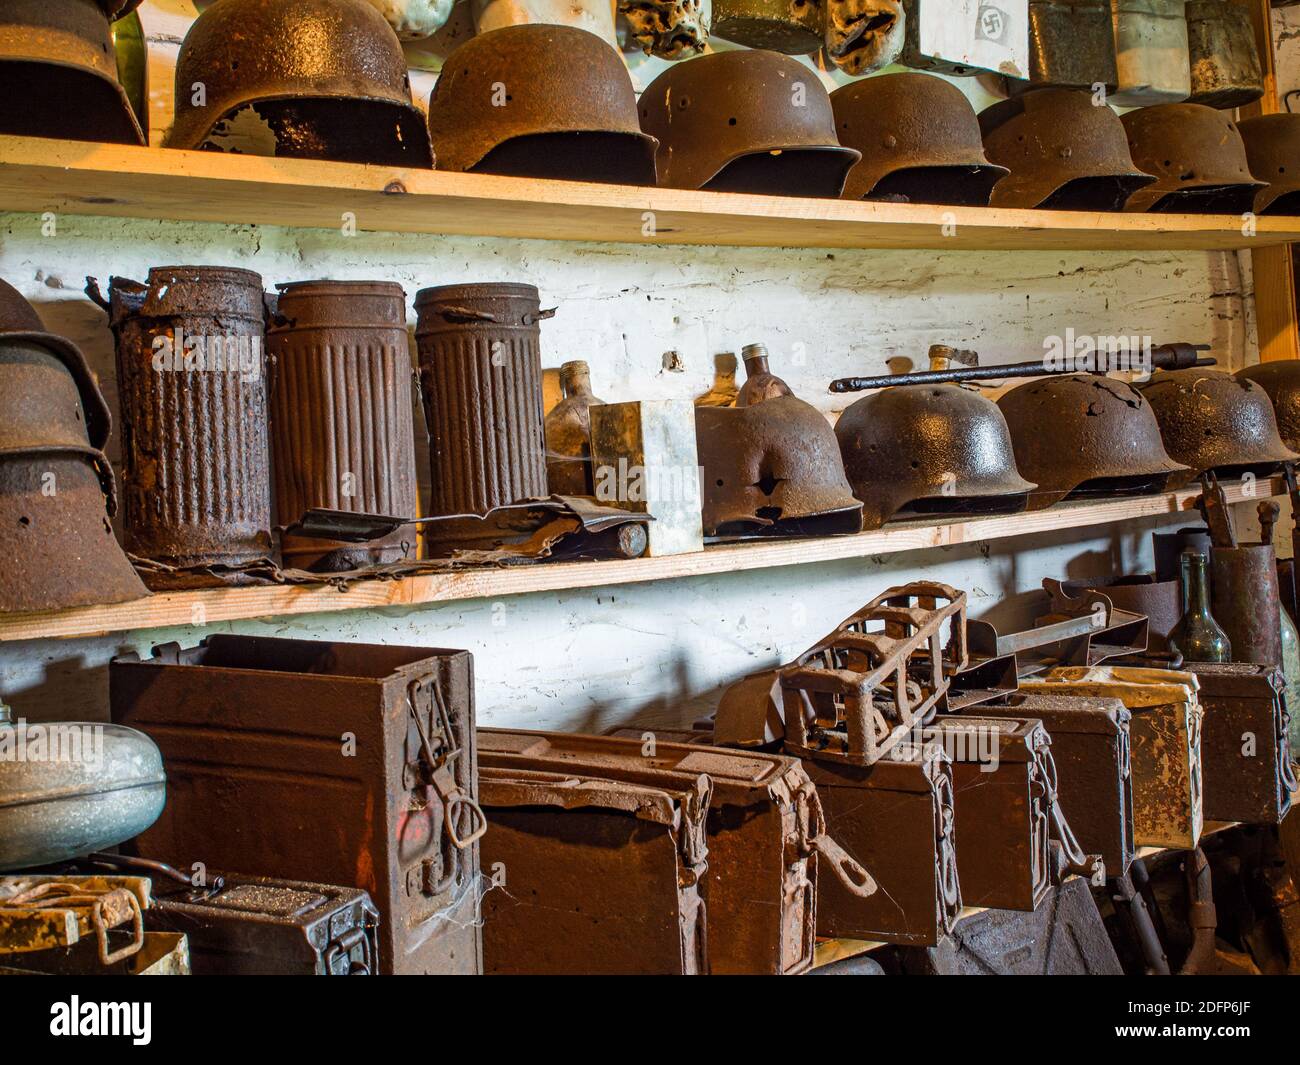 Zyndranowa, Poland - August 13, 2017: Collection of old metal helmets, vessels and other war accessories at the Lemko culture museum Stock Photo